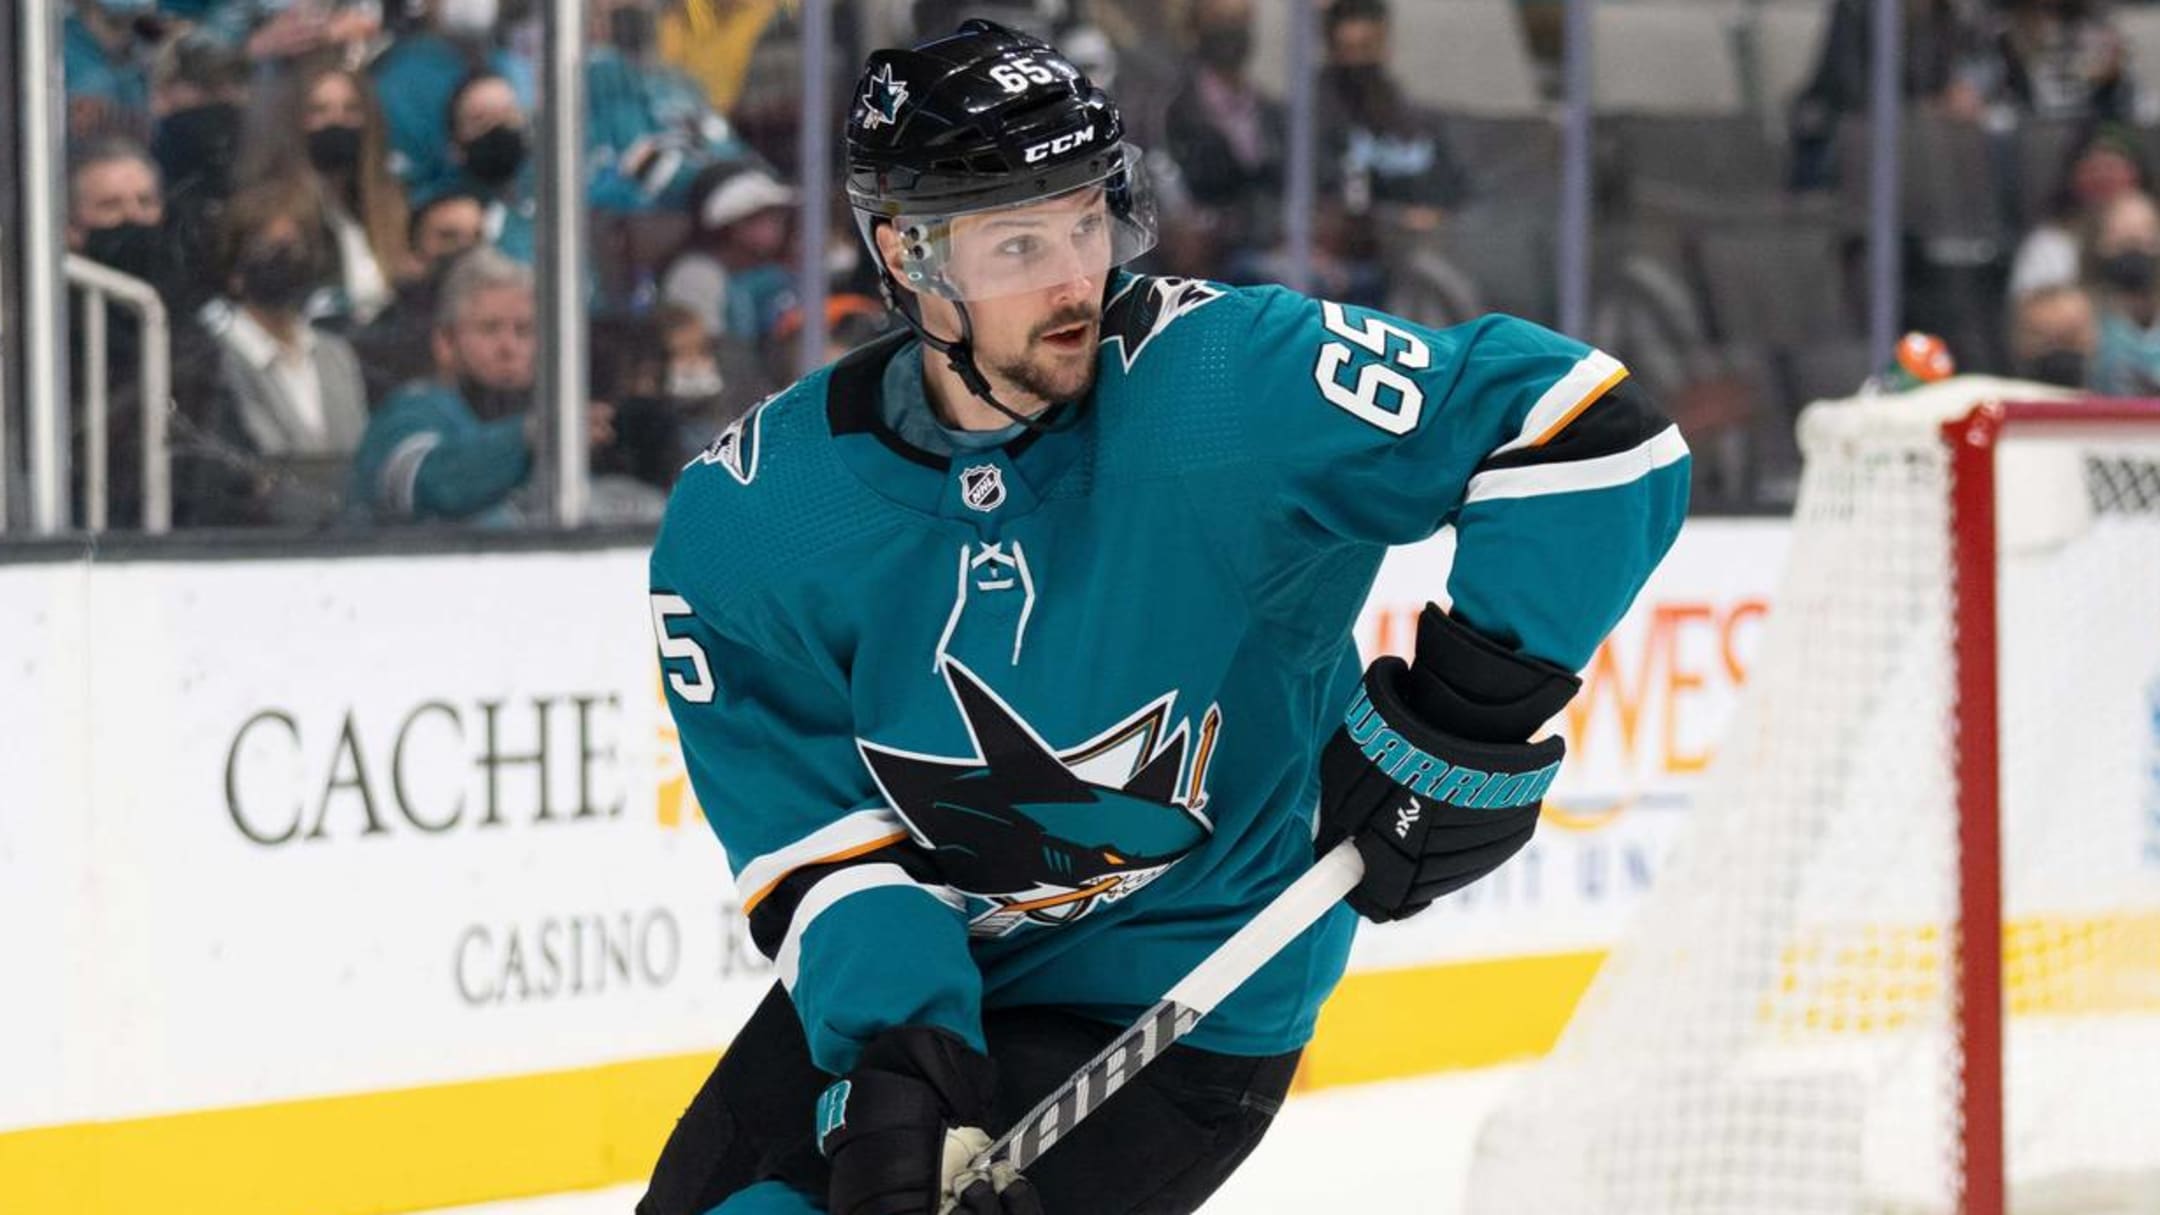 BREAKING: Karlsson Out Until At Least Mid-March After Forearm